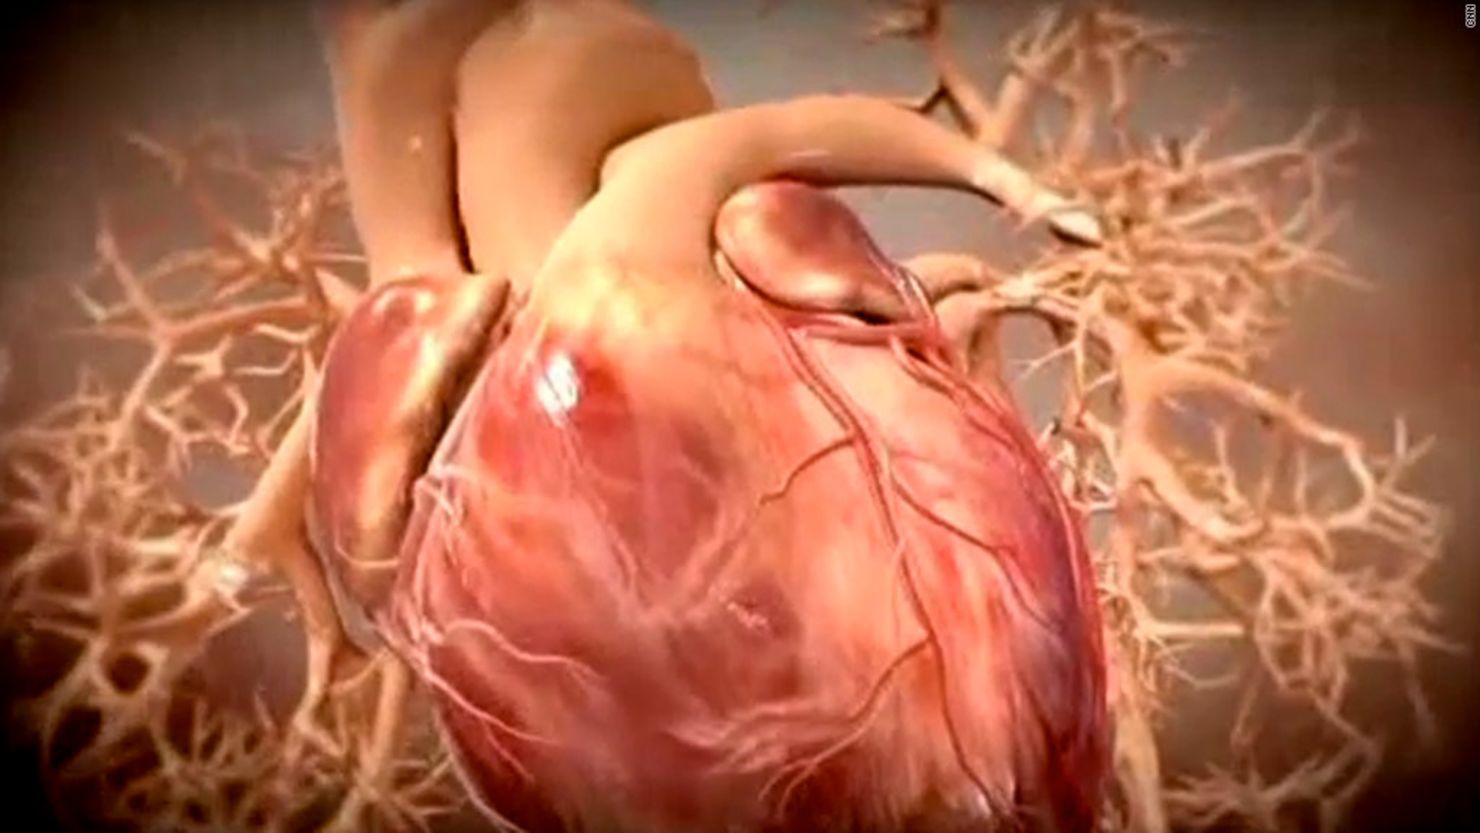 Symptoms of a heart attack may not always resemble those seen on TV, an expert says.